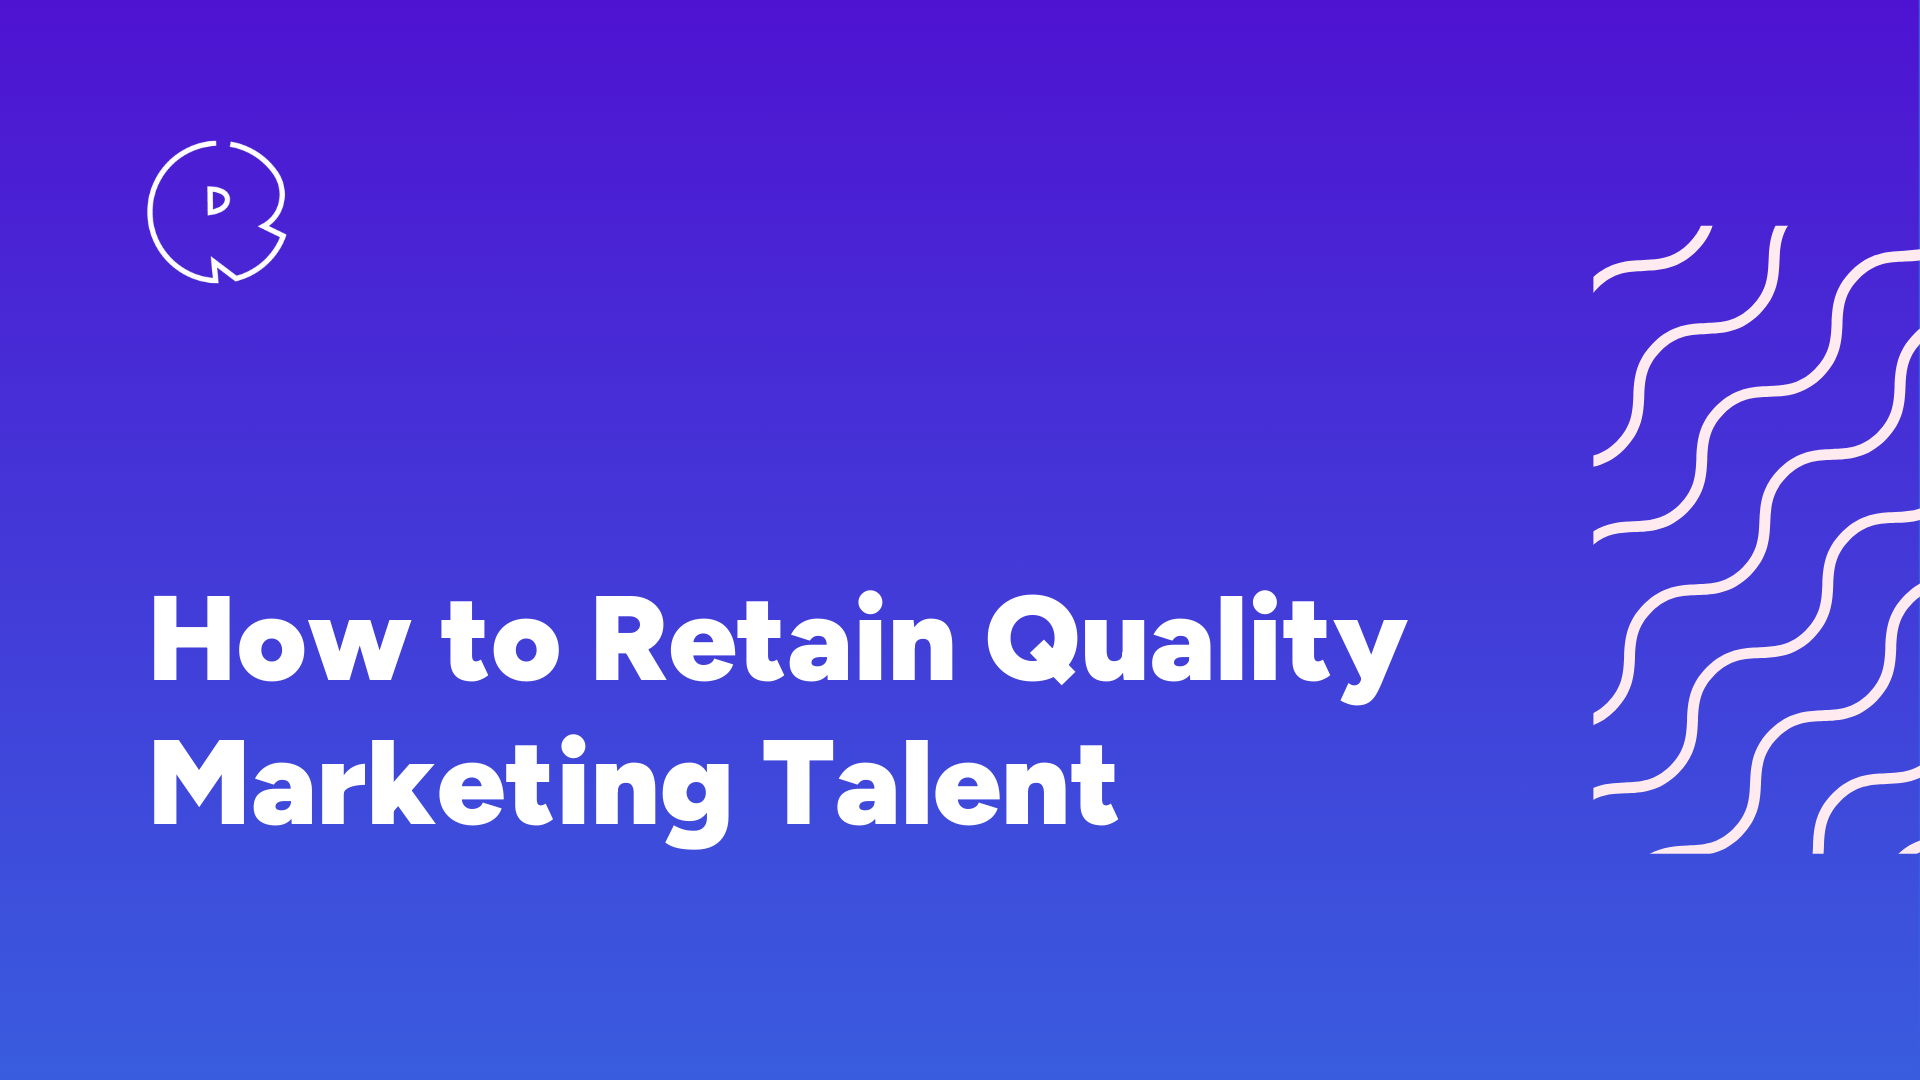 How to Retain Quality Marketing Talent